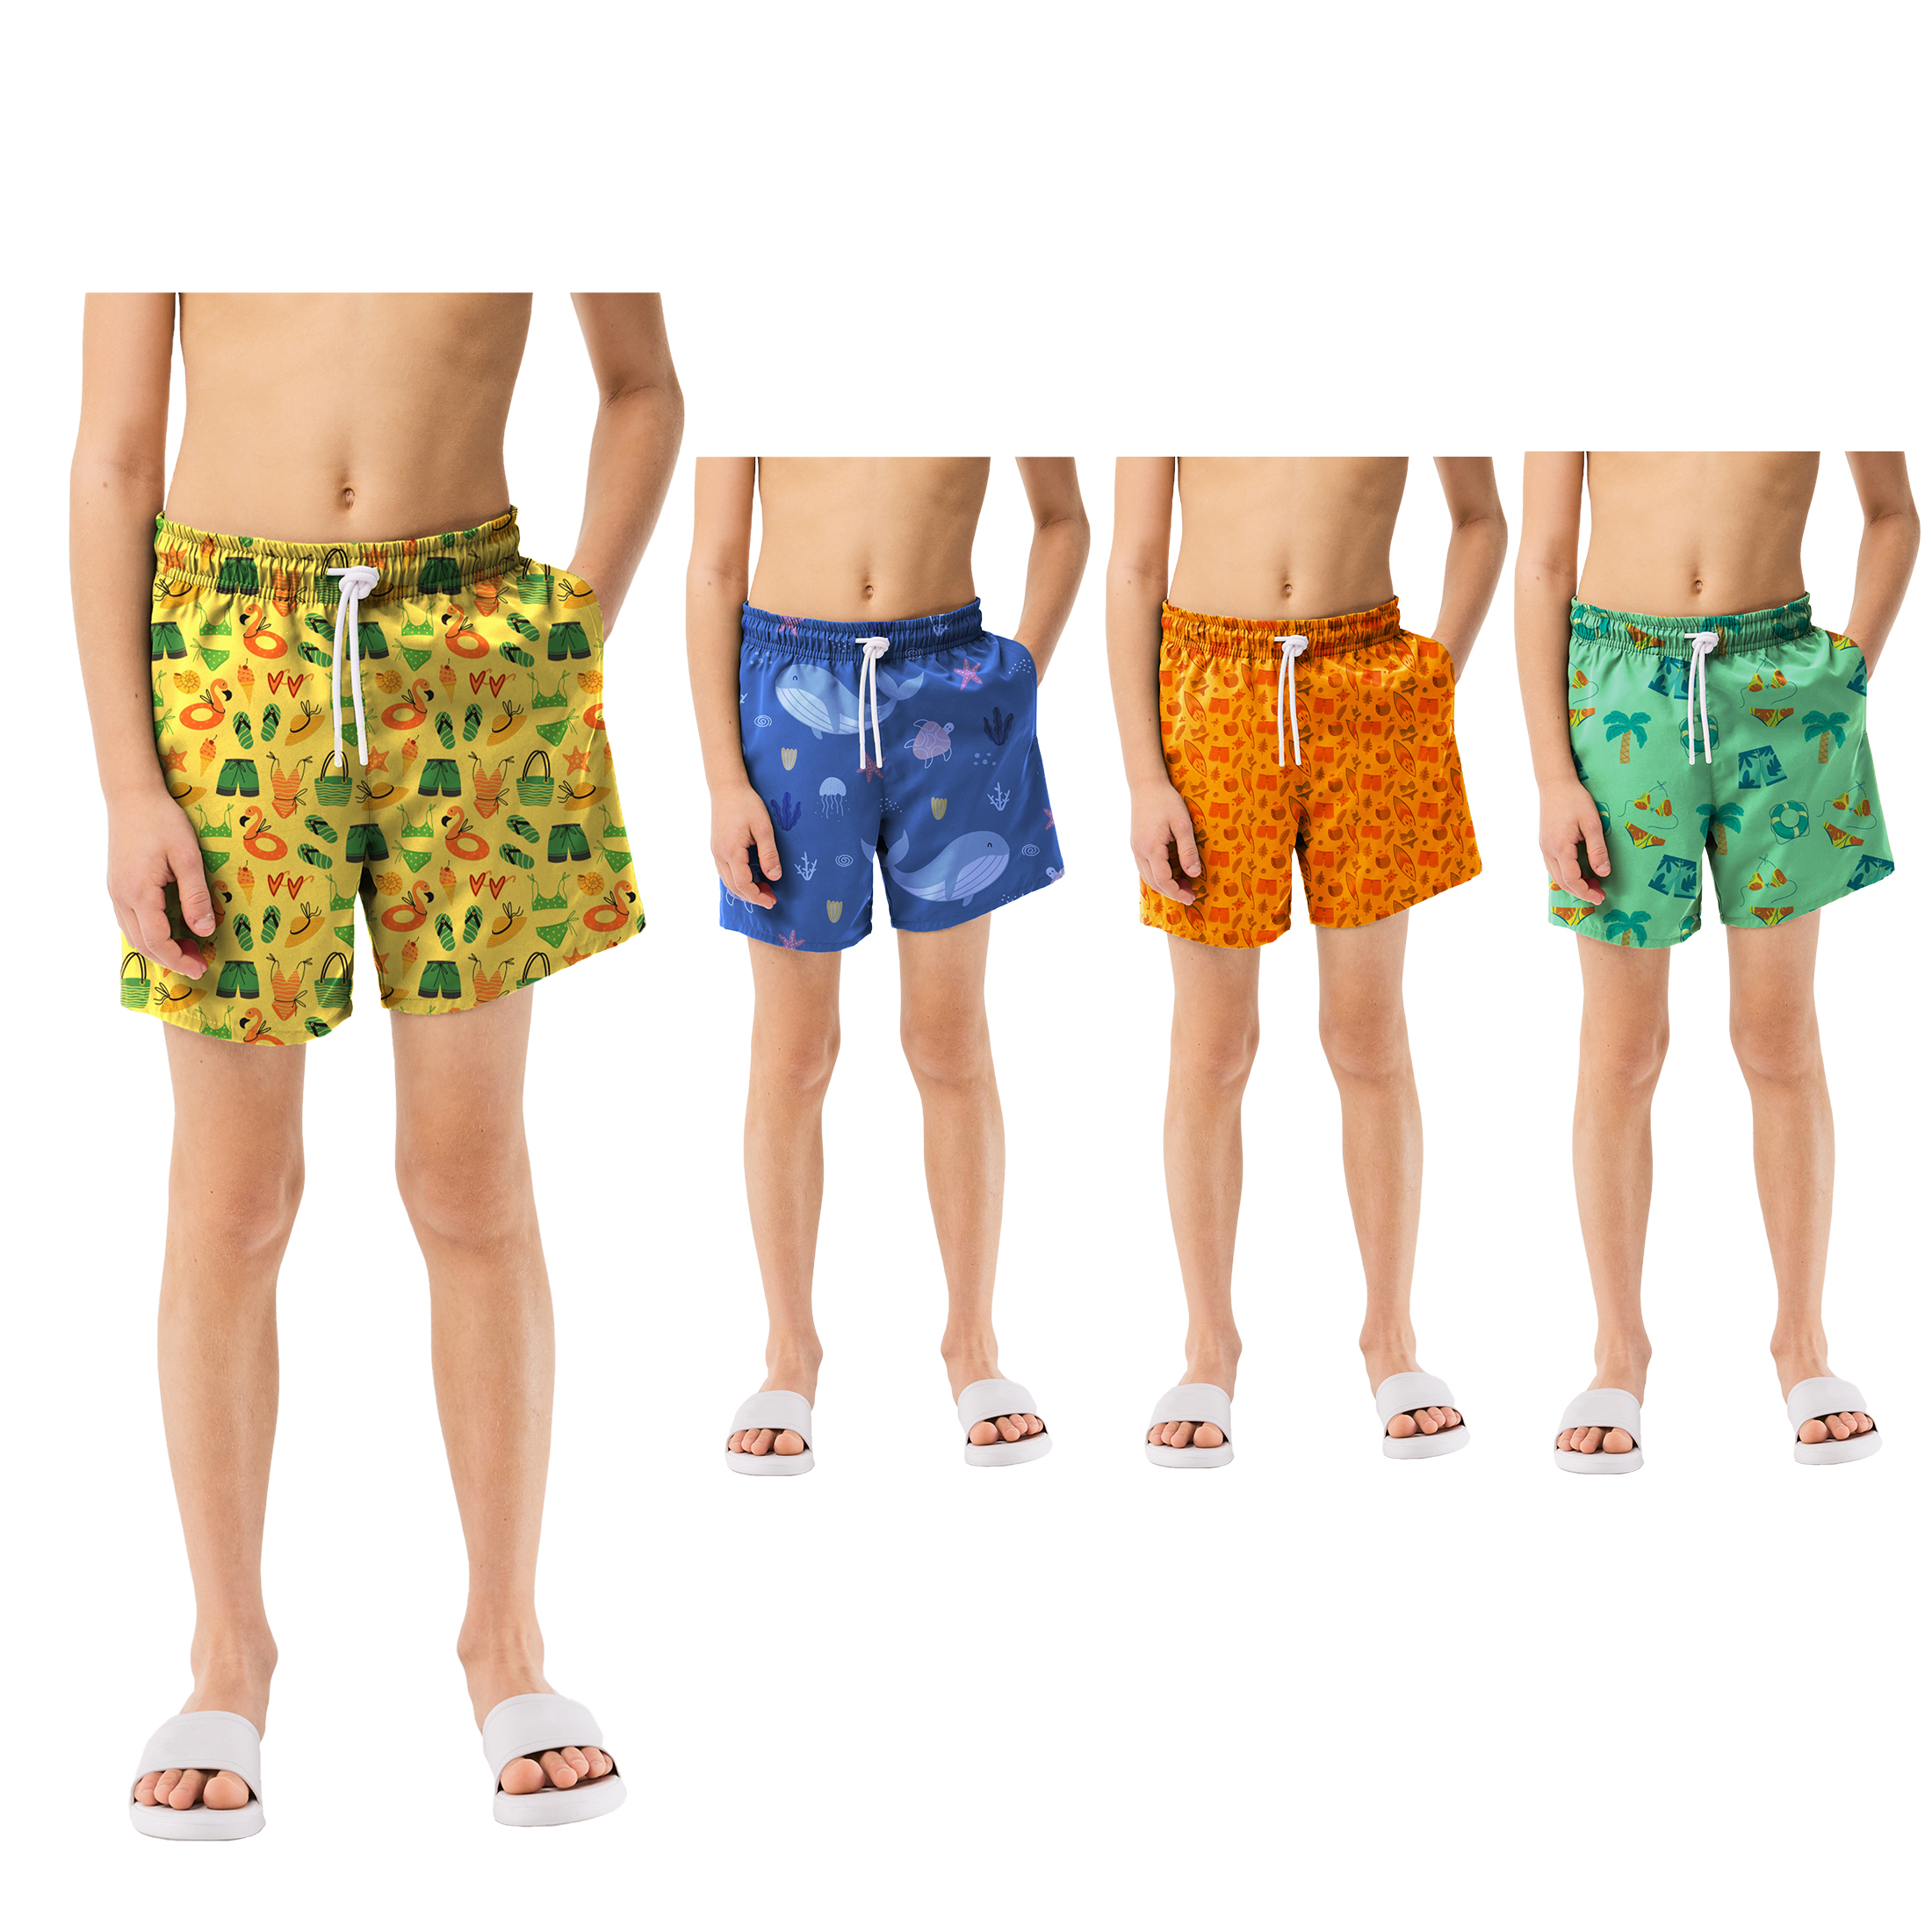 4-Pack Boy's Beach Summer Swim Trunk Shorts Printed Bathing Quick Dry UPF 50+ Comfy Swimsuit - S